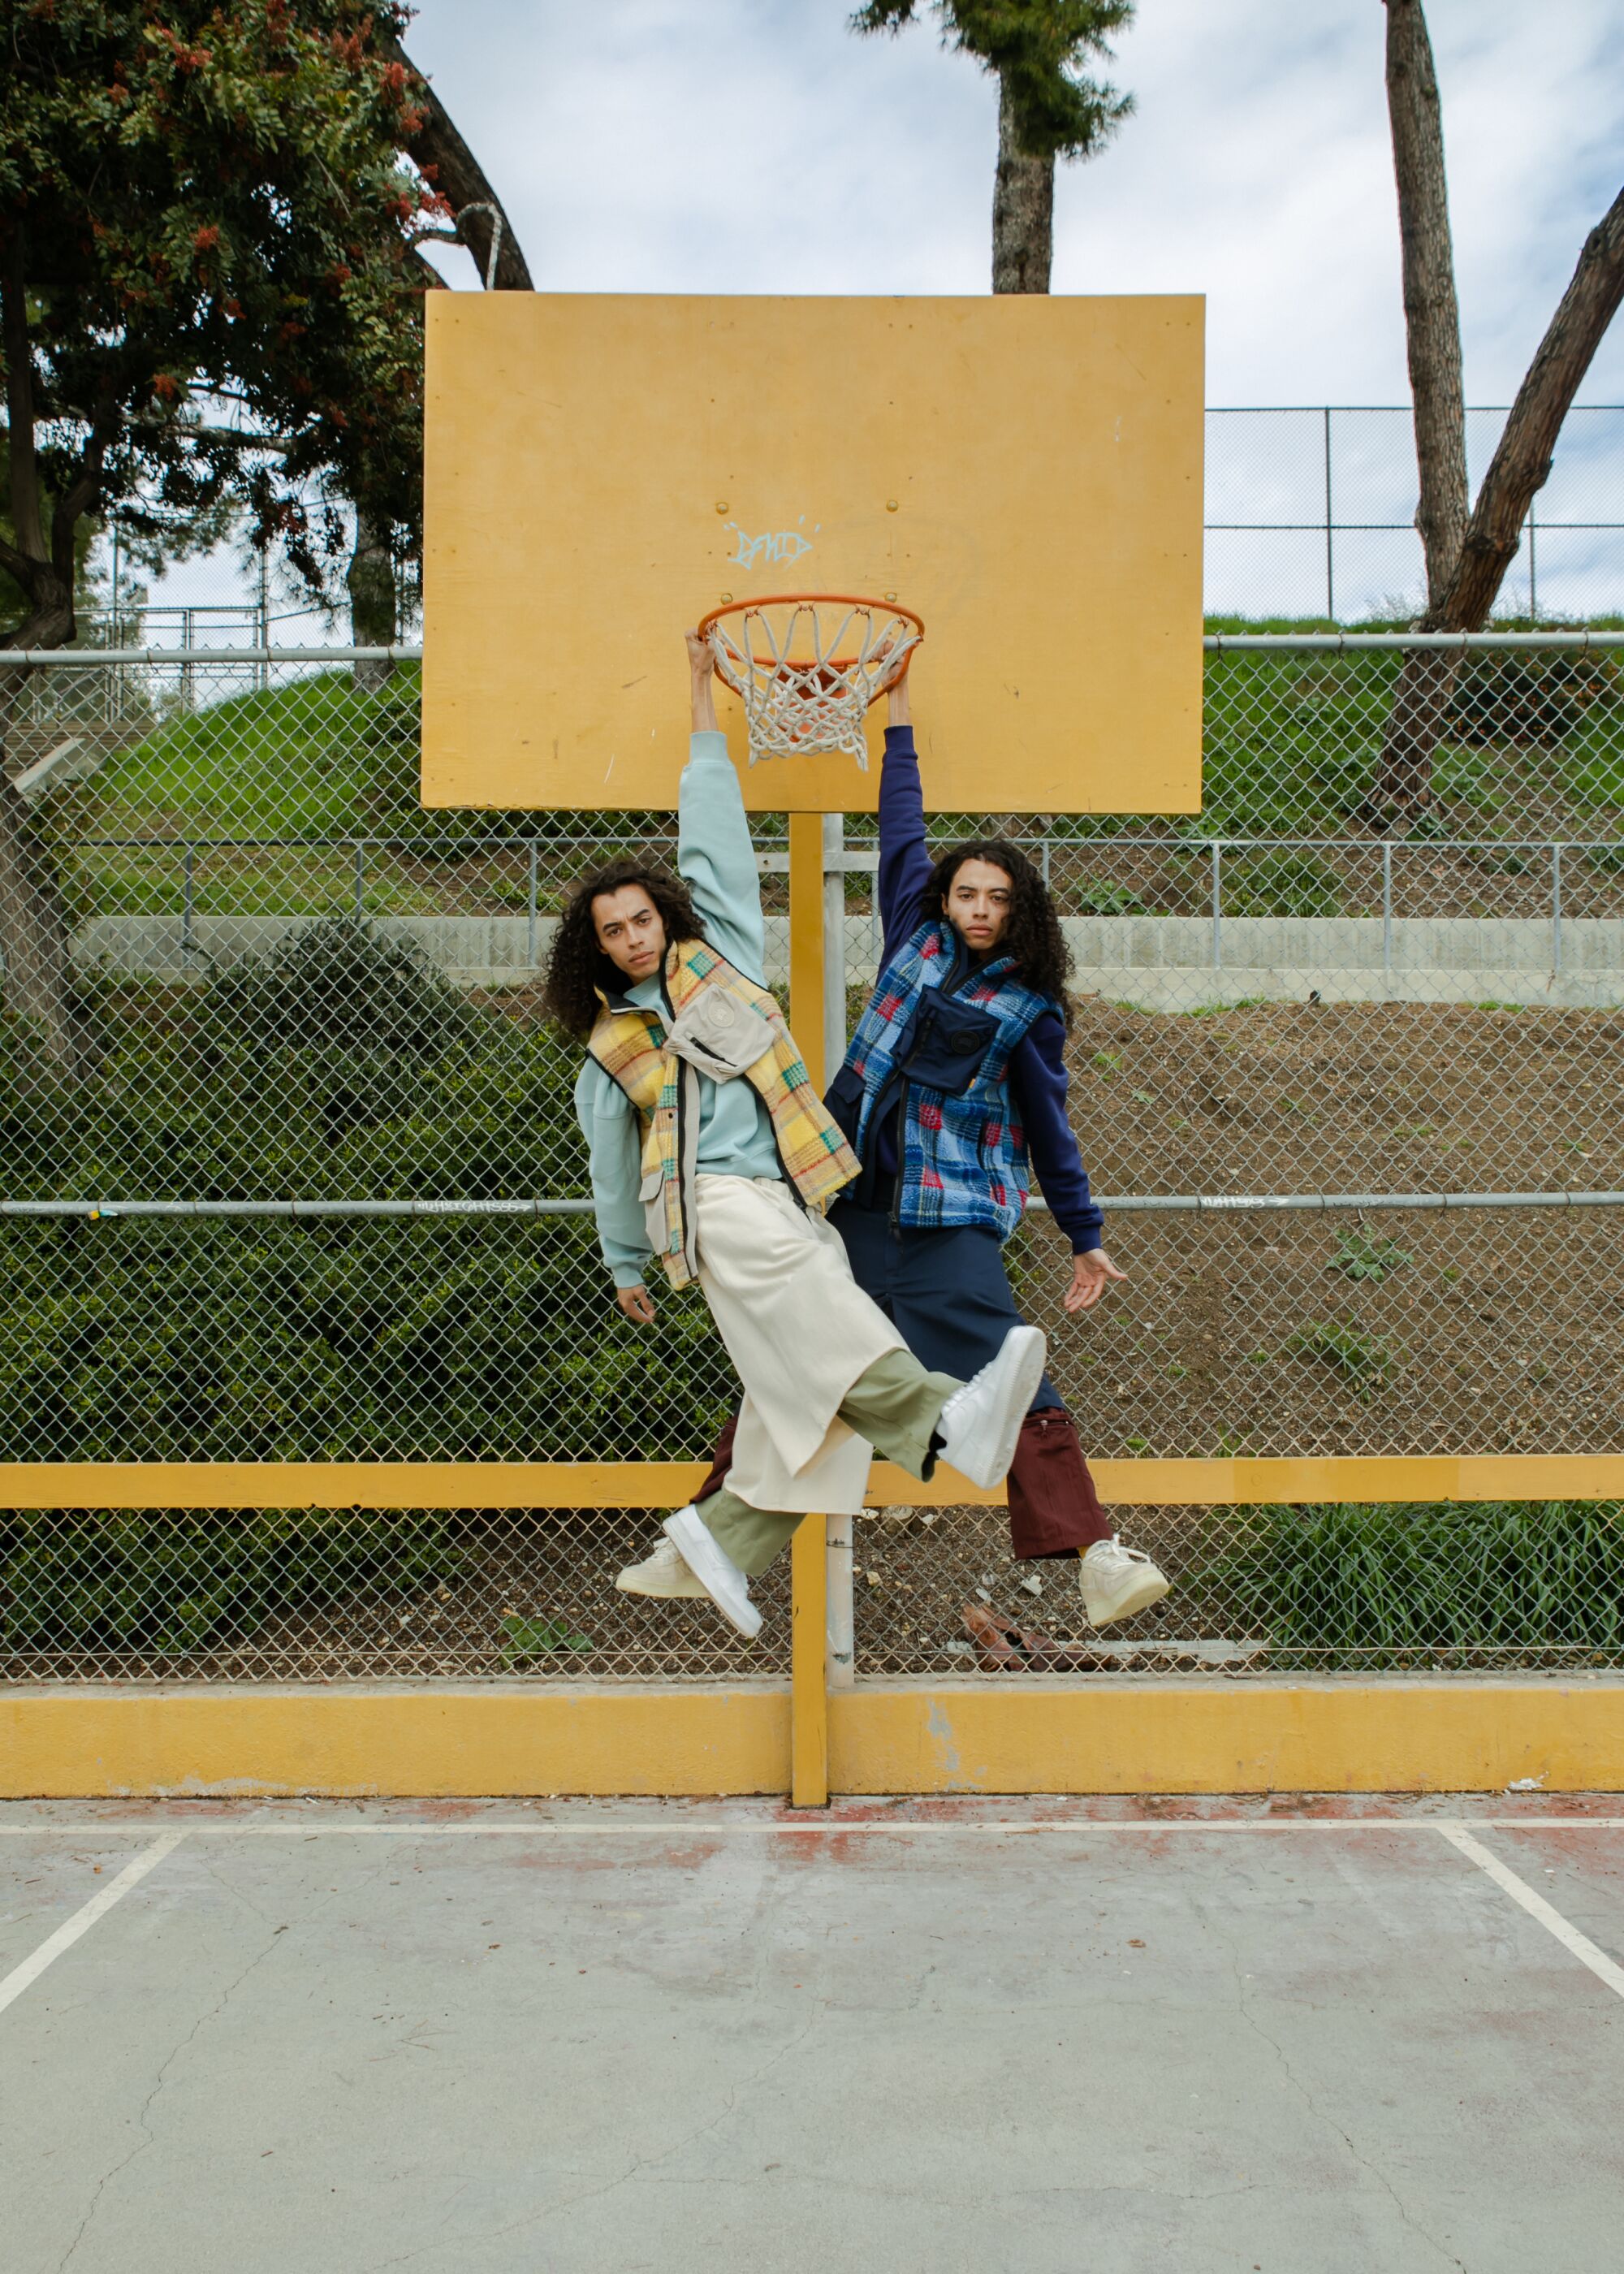 Two men hang from a basketball hoop while wearing tartan vests, one yellow, one blue.